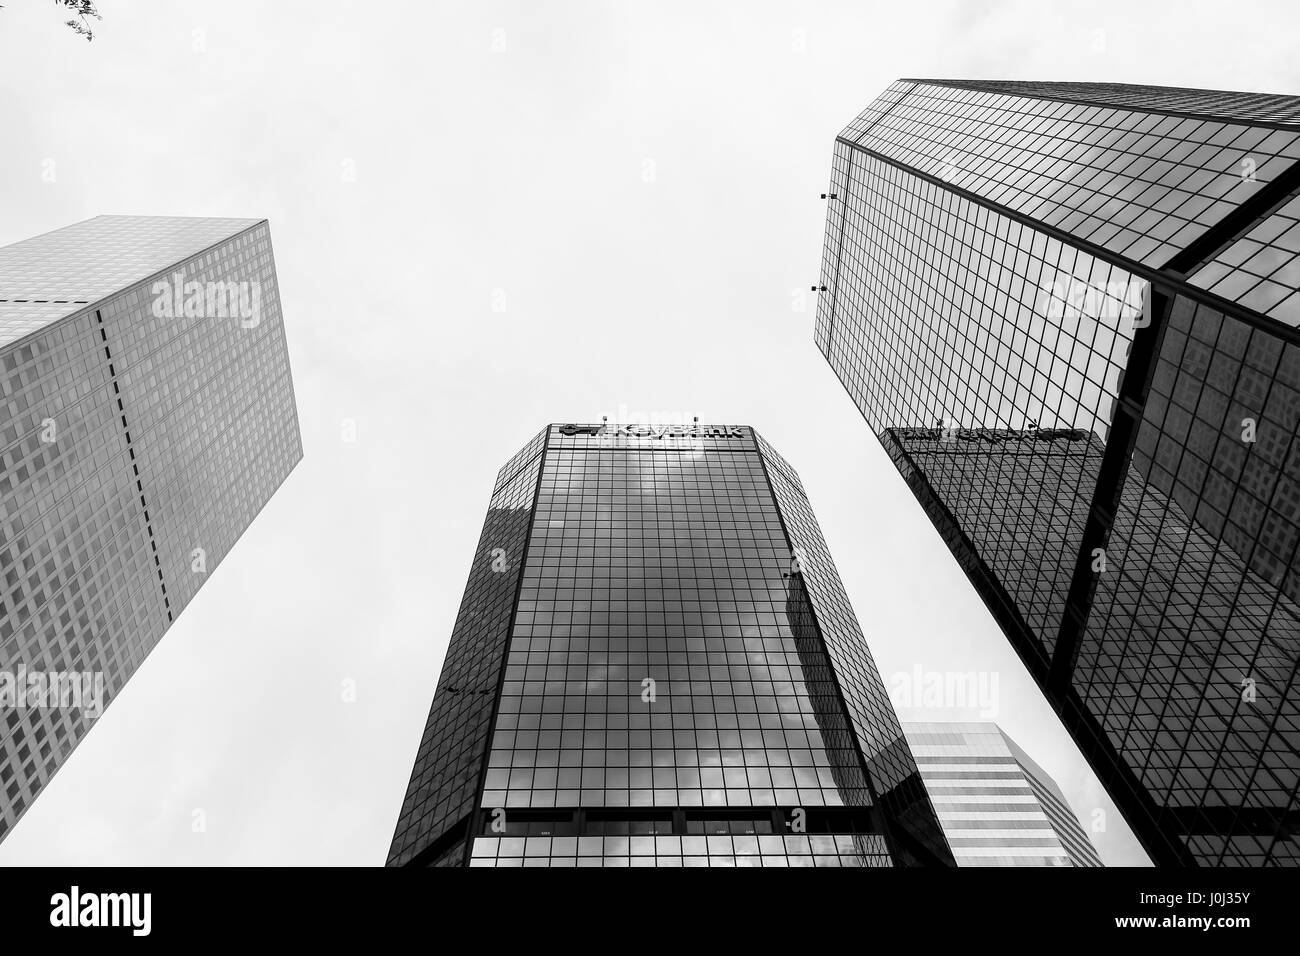 Denver, USA - May 25, 2016: Looking up skyscrapers of the World Trade Center Denver, one of them with a Keybank sign. The picture is in monochrome. Stock Photo